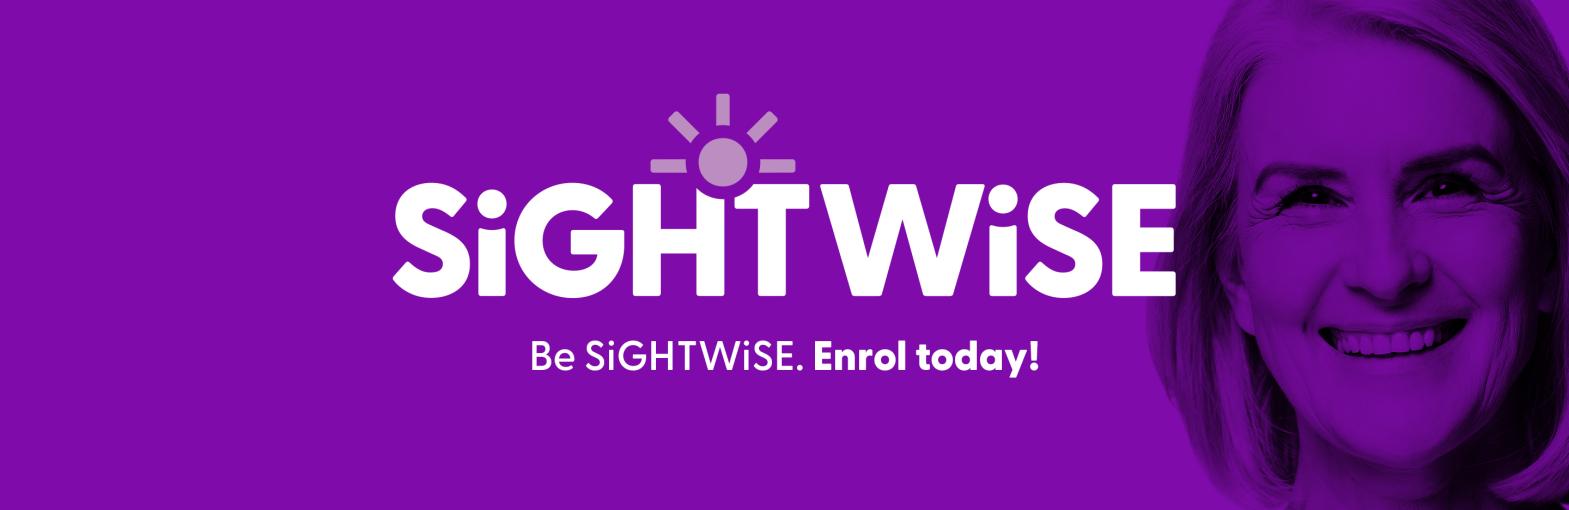 Be SiGHTWiSE Enrol Today!